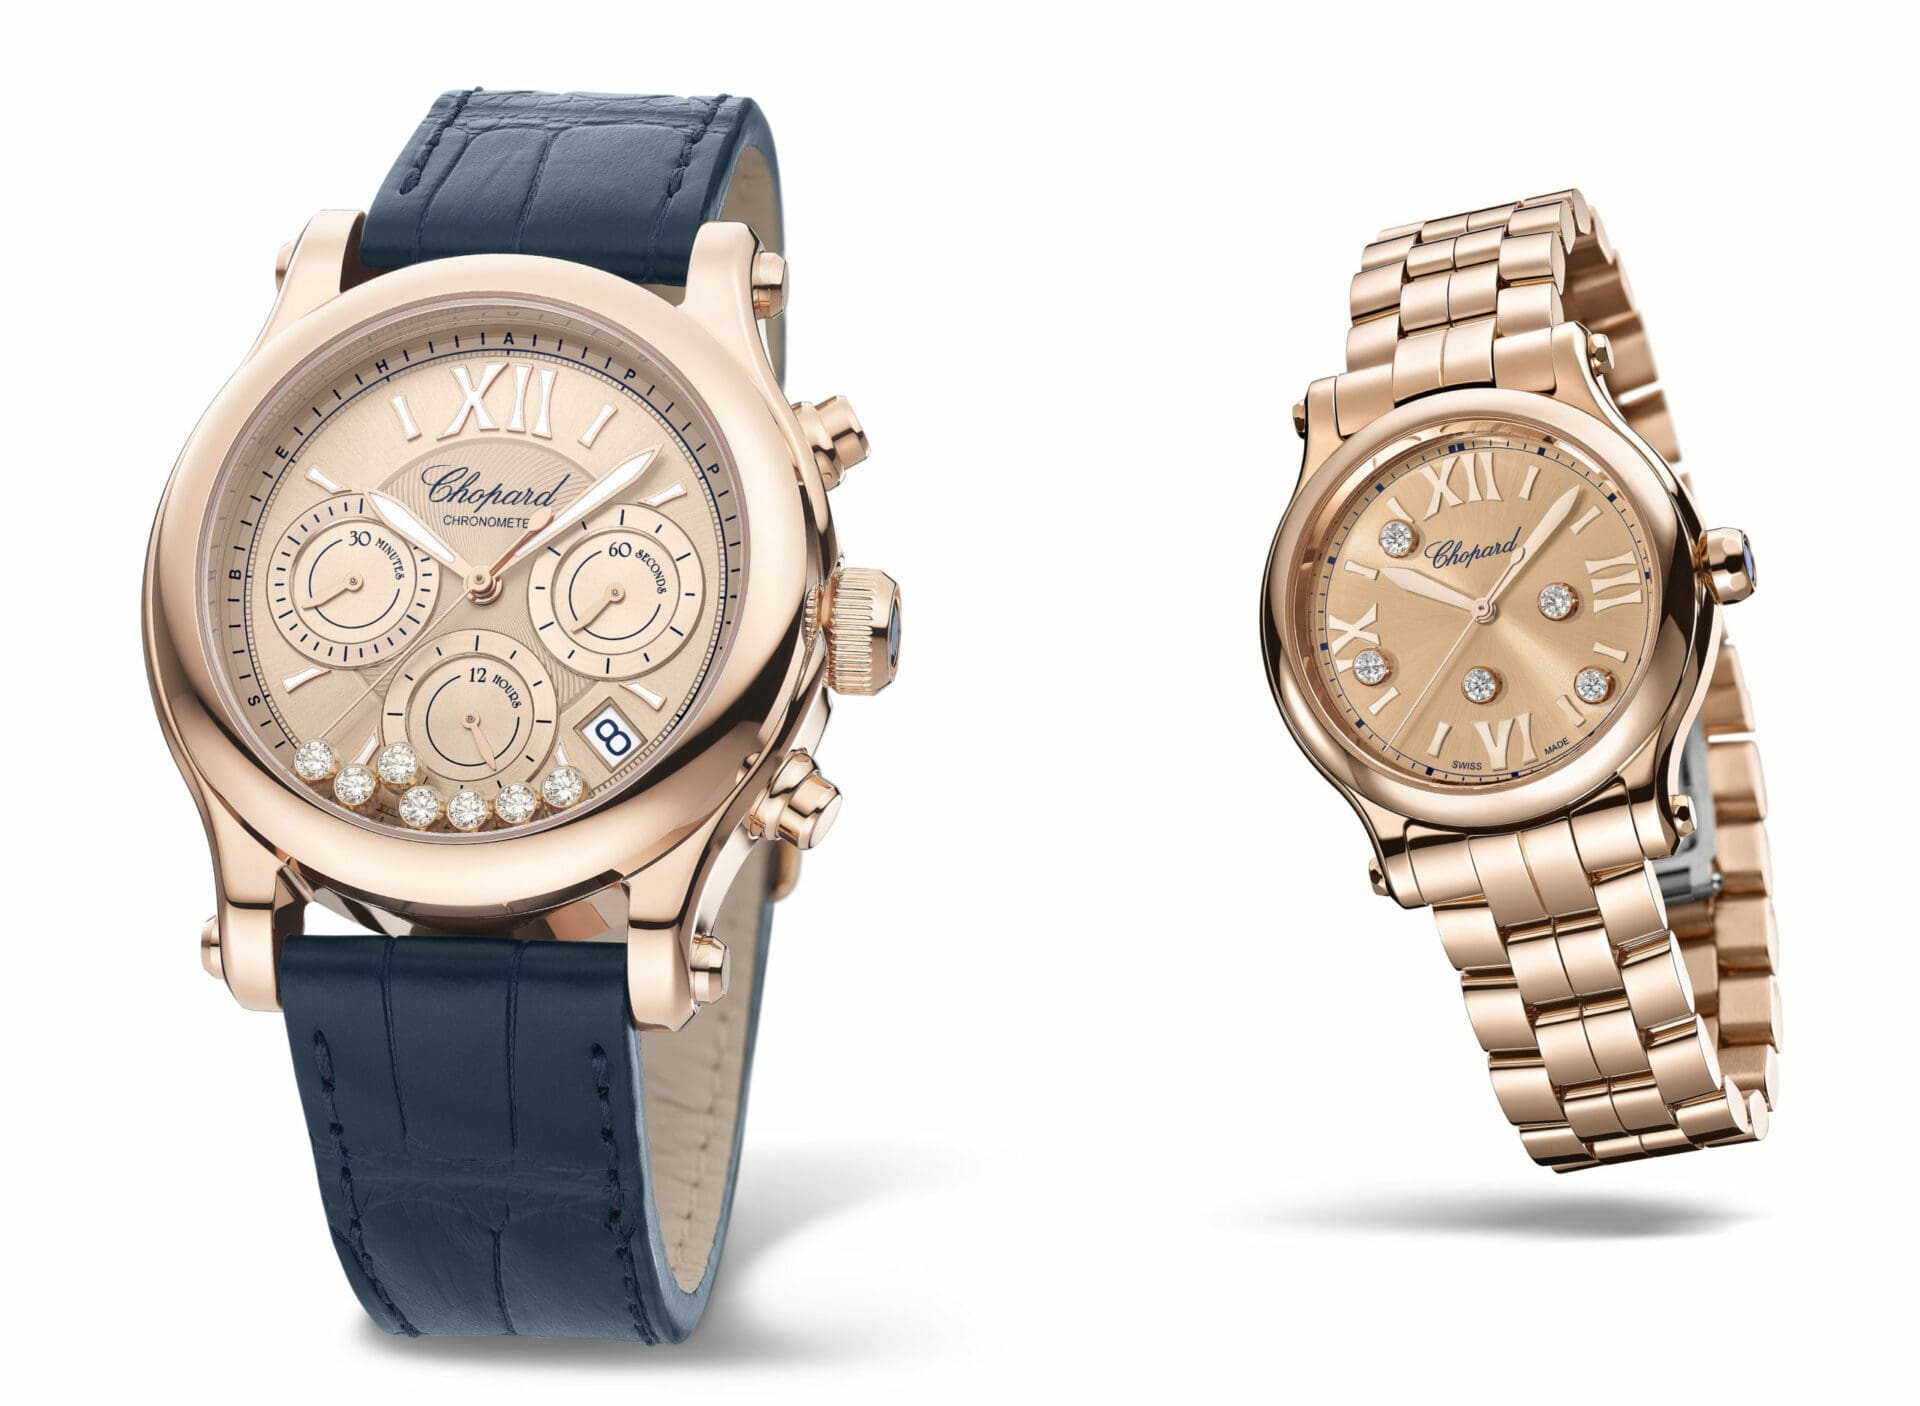 INTRODUCING: The Chopard Happy Sport gets an update with rose-gold and chronograph versions